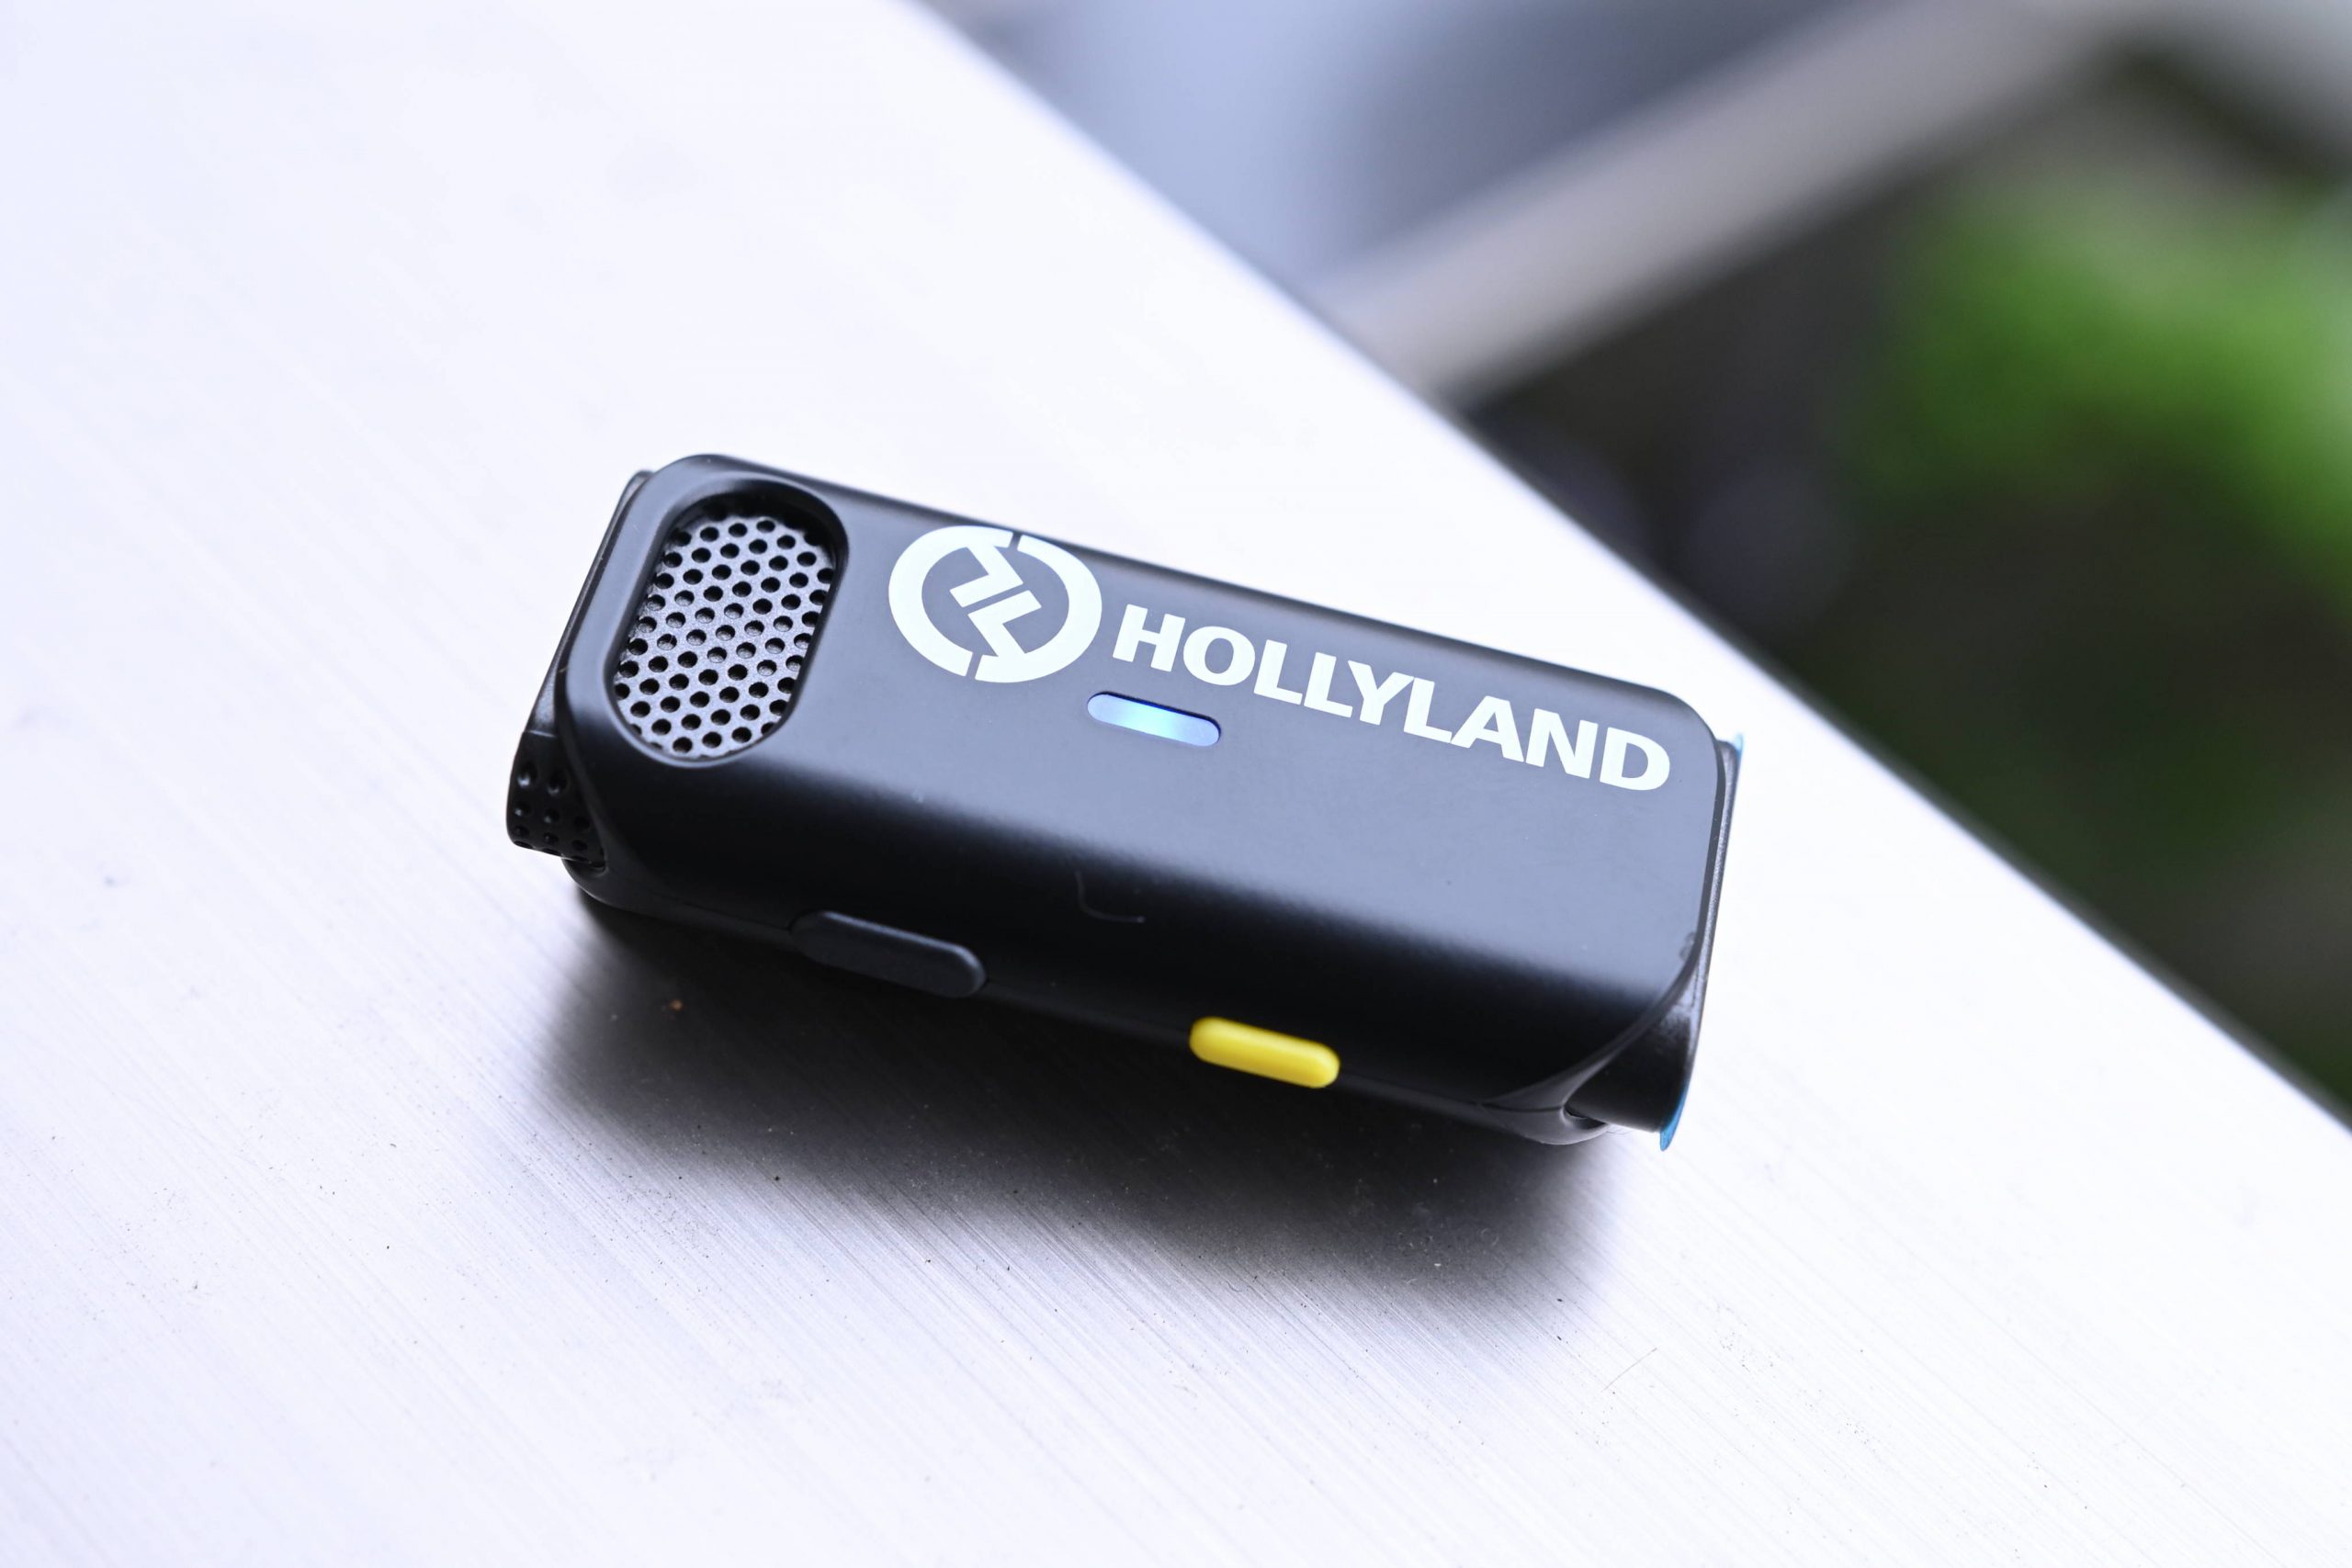 Hollyland Lark M1 wireless microphone review - Quality sound on the go